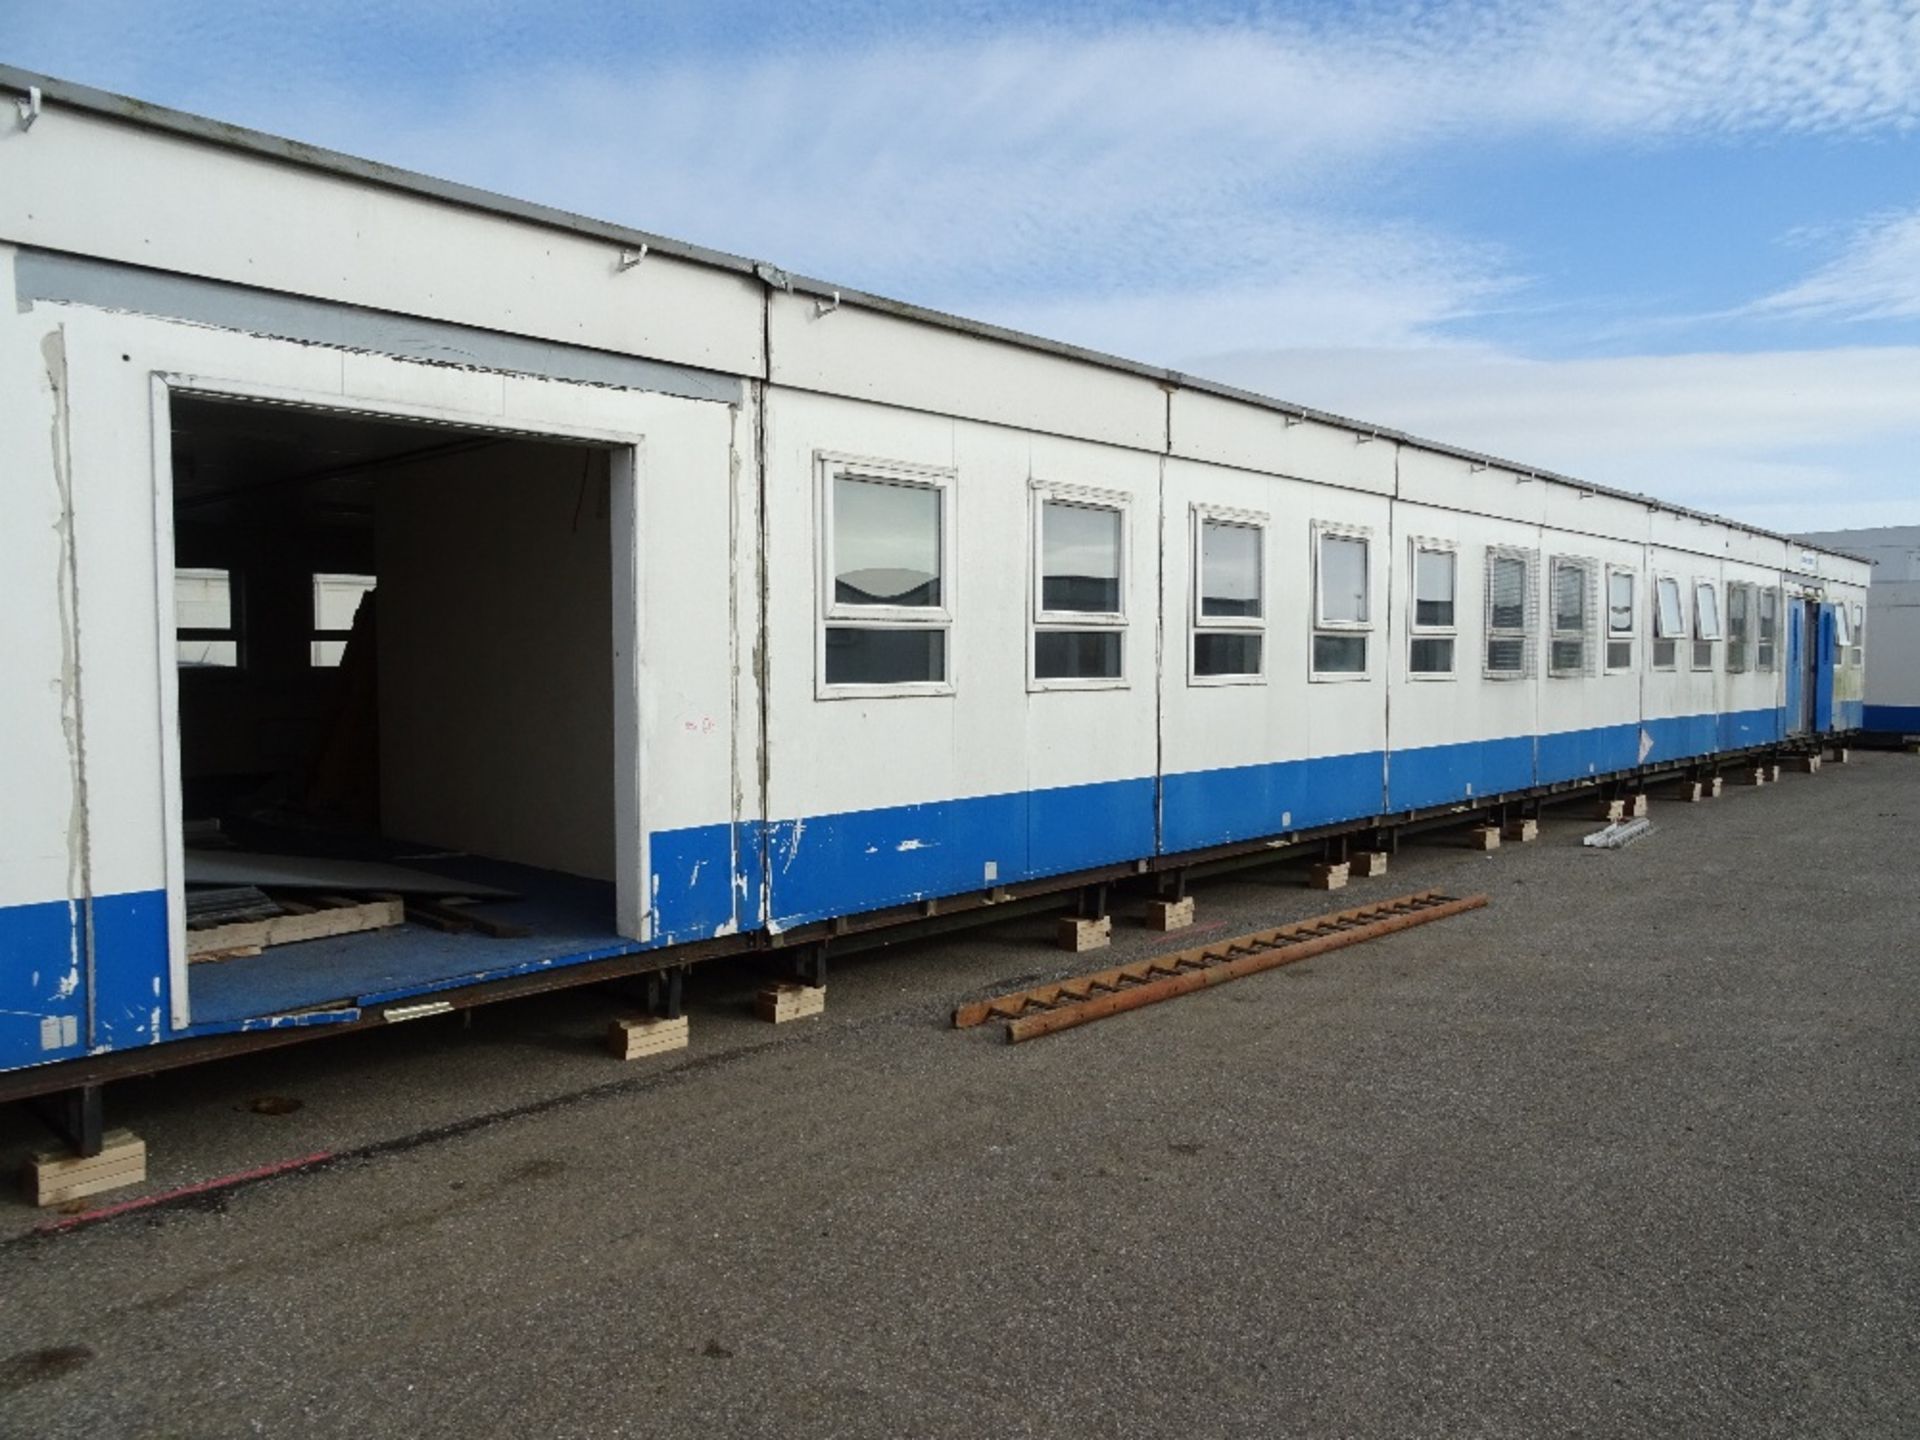 11 Bay Plastisol Single Storey Modular Building with PVC Windows & Security Grills, 9.6m x 3m Units - Image 21 of 21